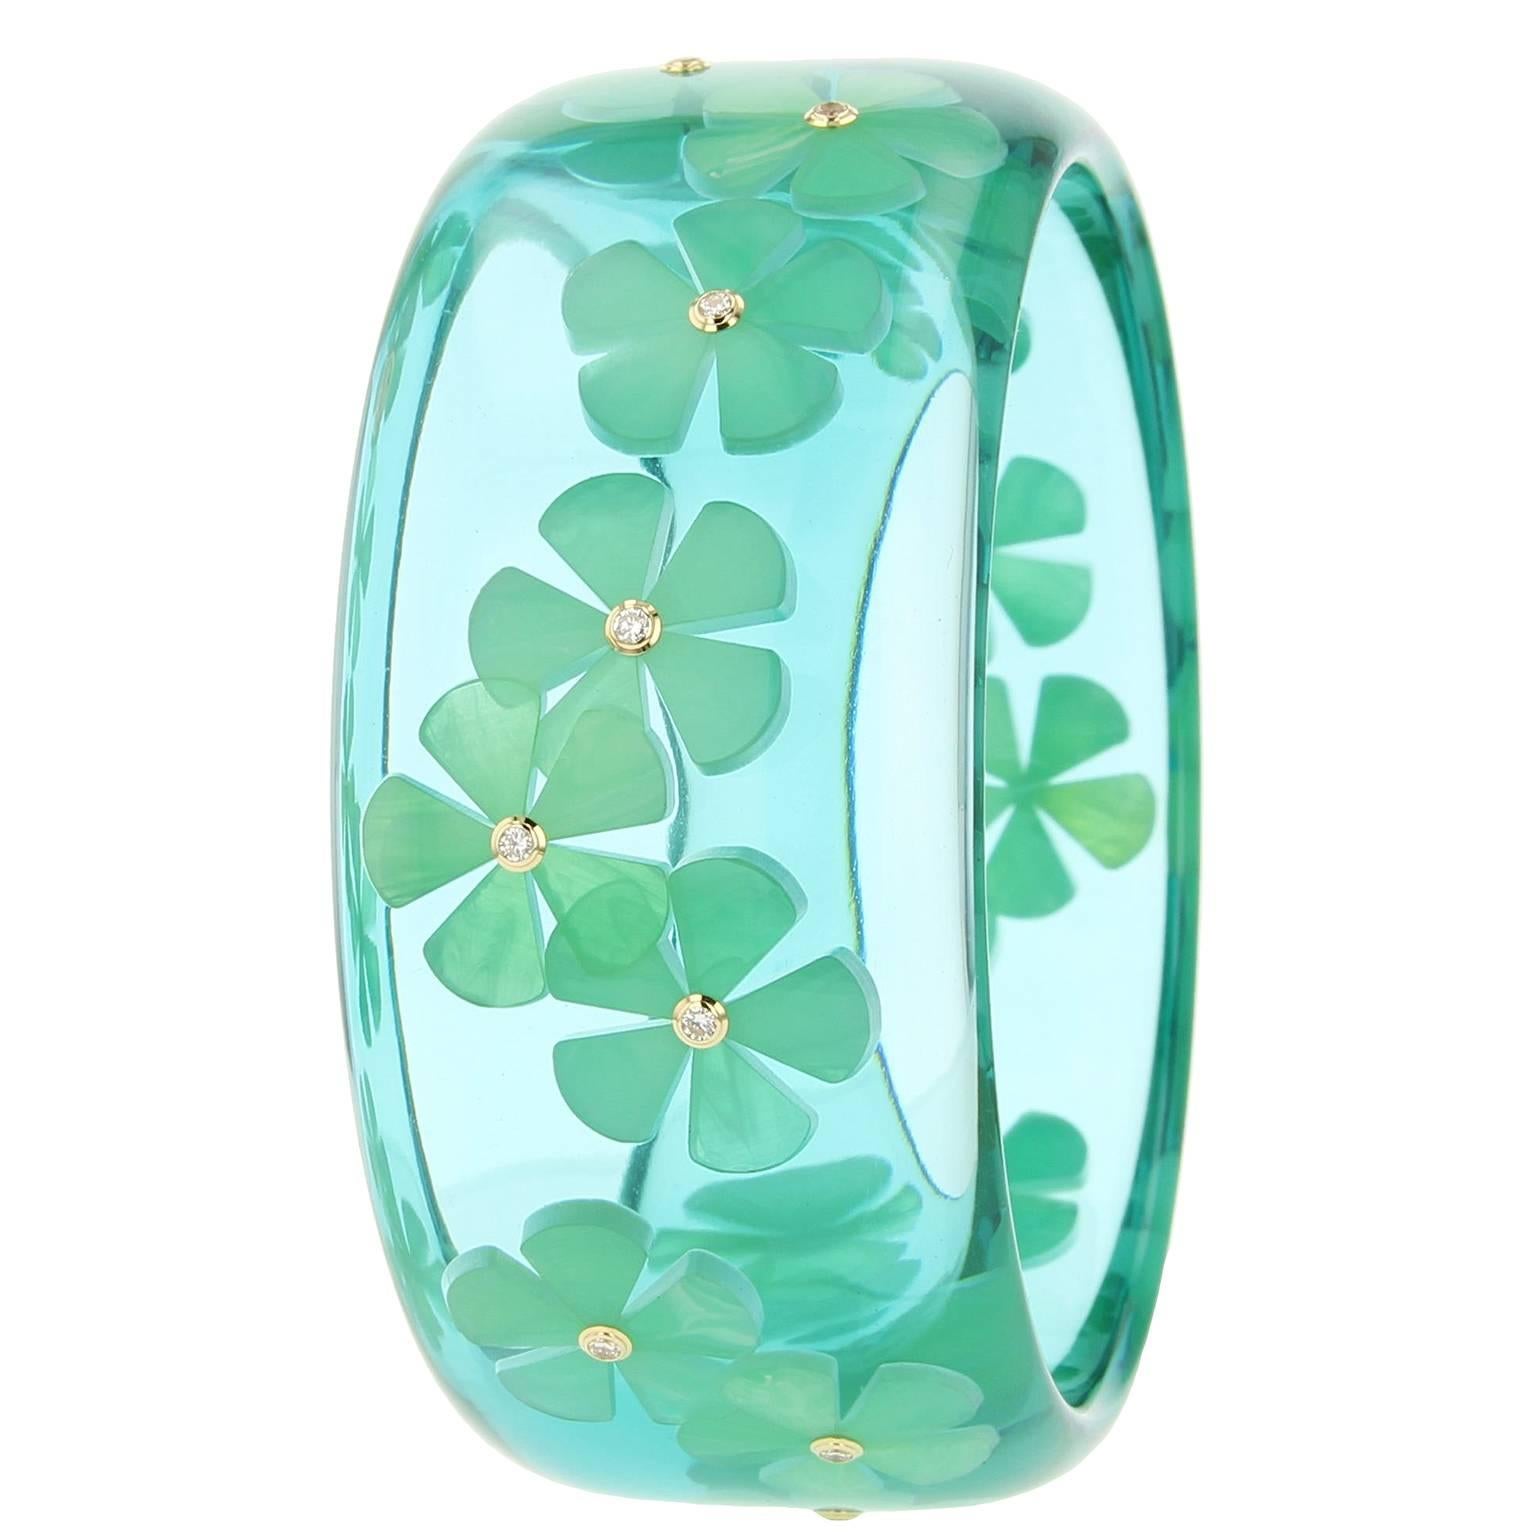 This unique Mark Davis bangle was handcrafted using bluish green vintage prystal bakelite. At the center of each inlaid flower is a fine diamond set in an 18k yellow gold bezel. 

Full details below: 
• Part of the Mark Davis Collector line
•